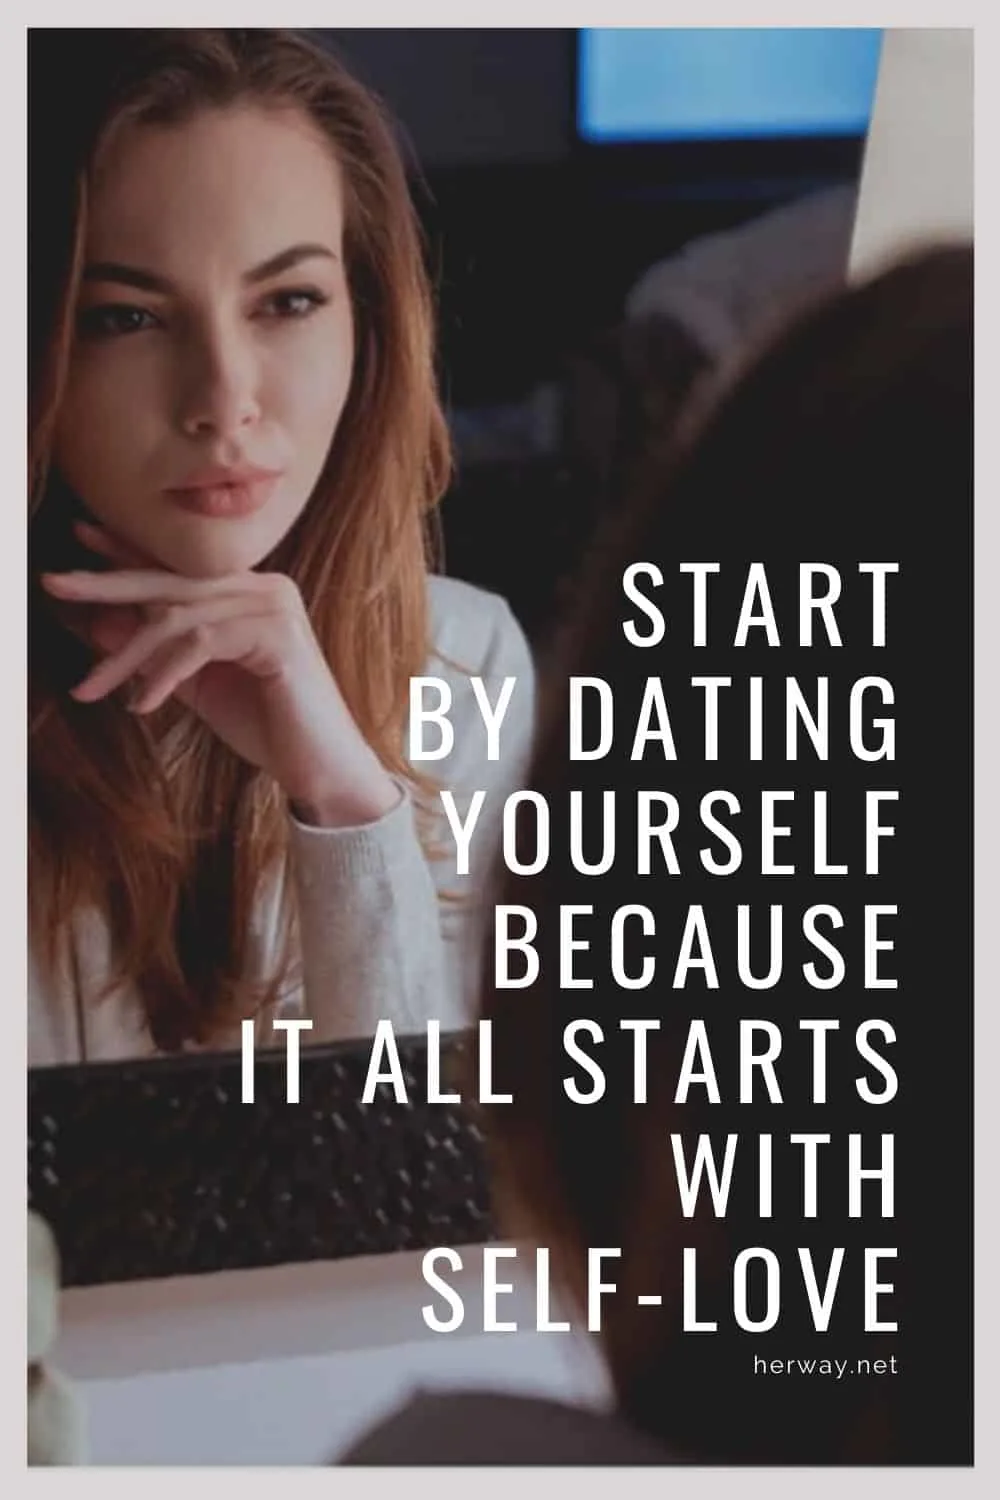 Start By Dating Yourself Because It All Starts With Self-Love